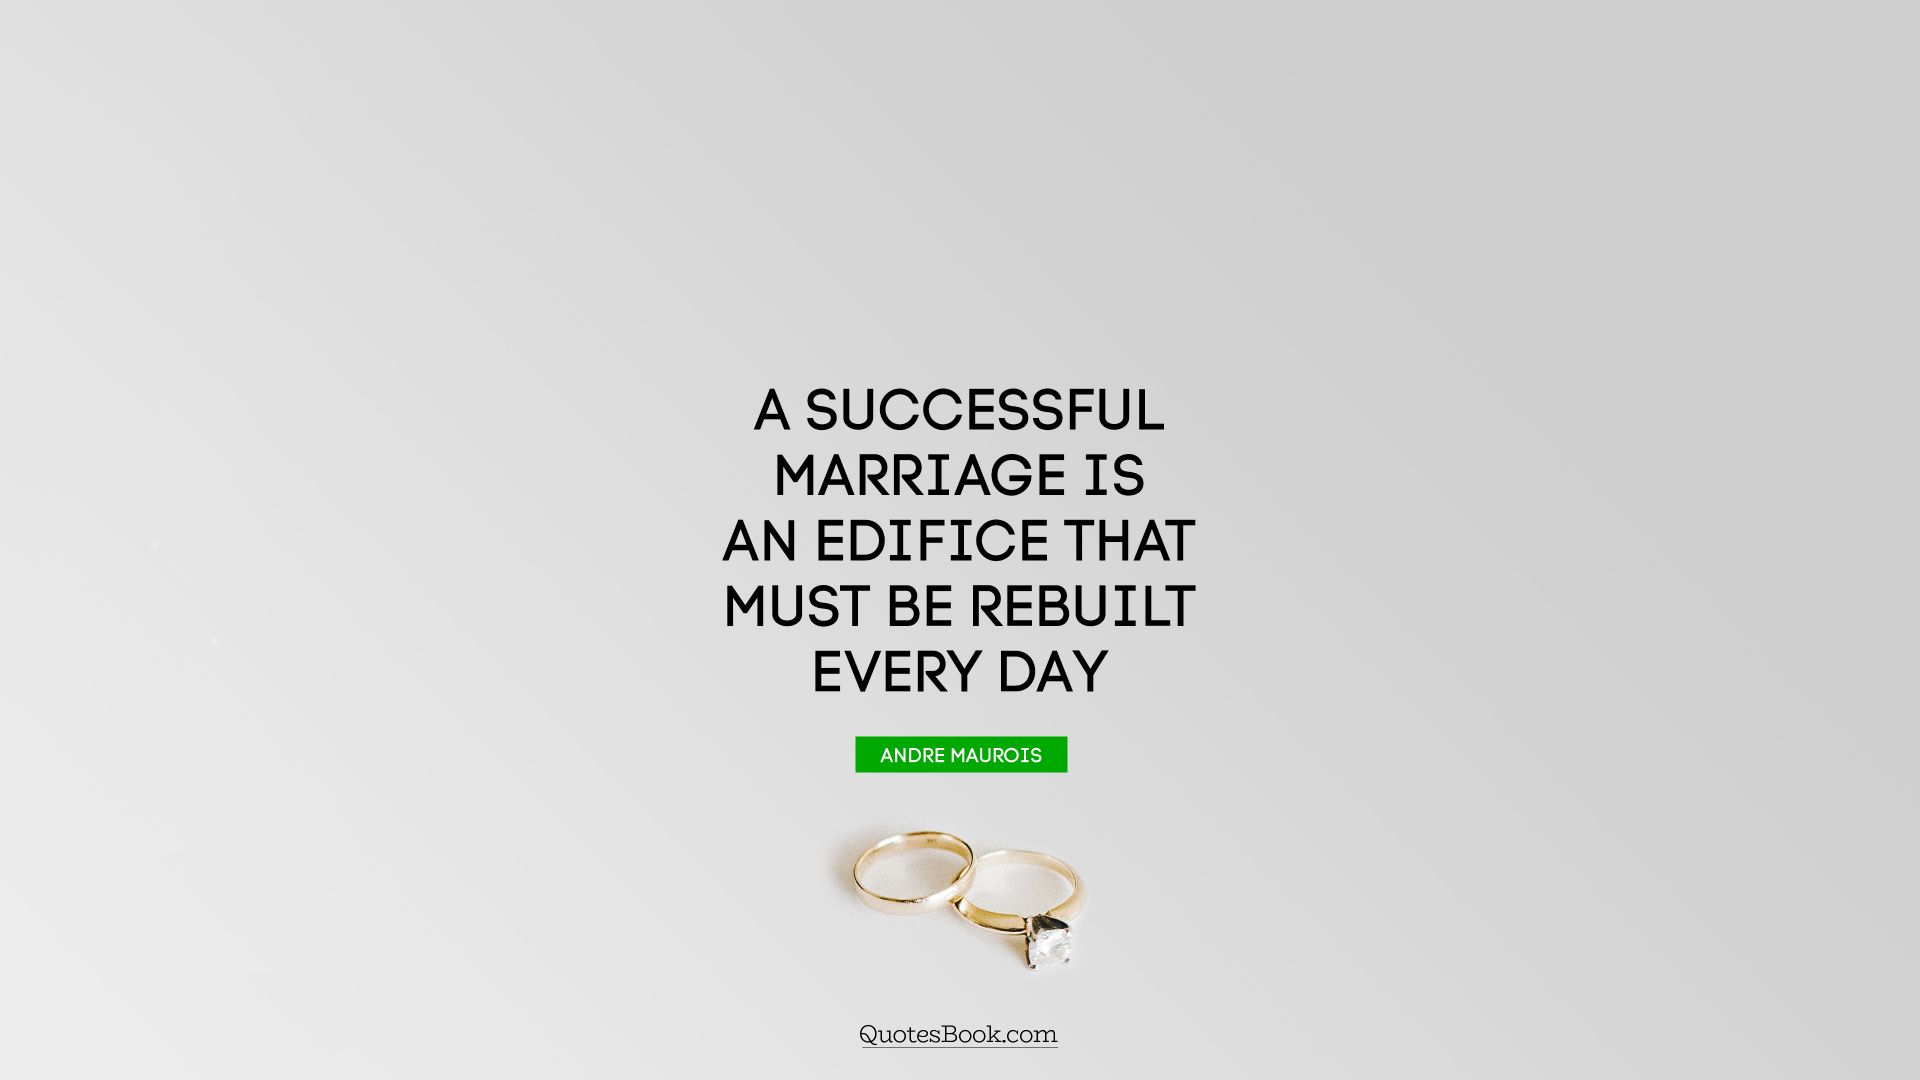 A successful marriage is an edifice that must be rebuilt every day. - Quote by Andre Maurois